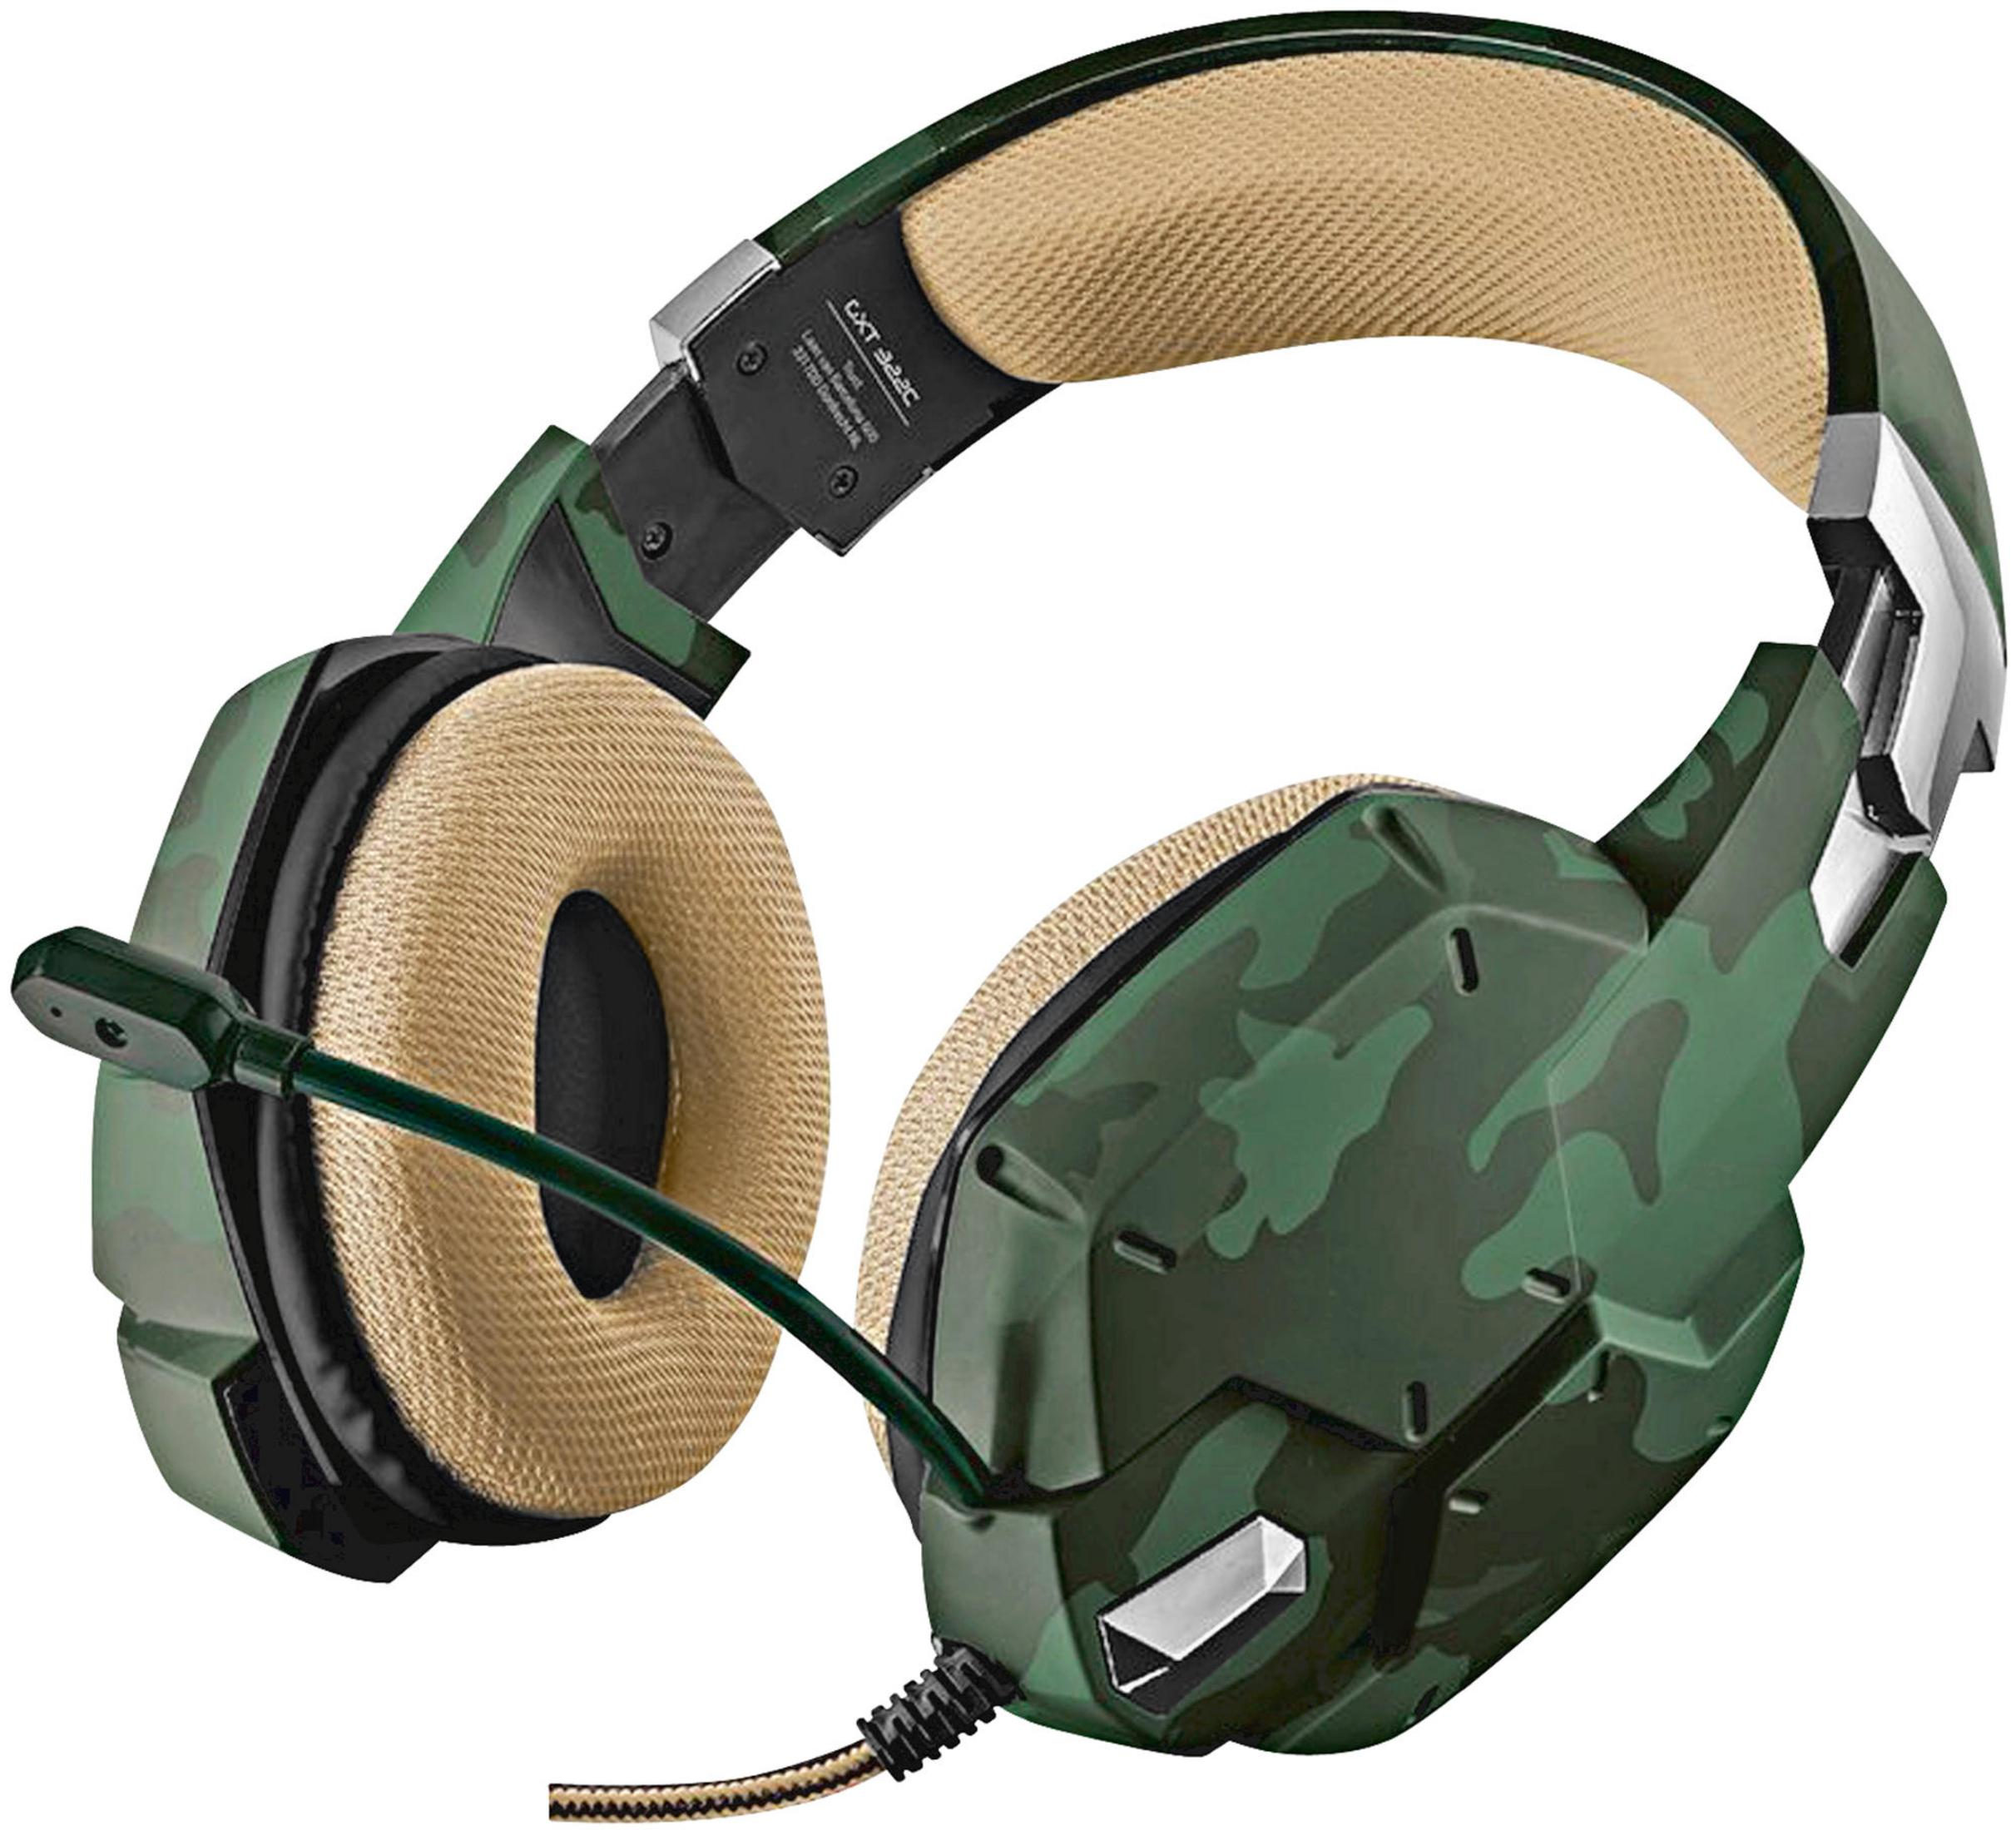 TRUST 20865 GXT 322C GAMING In-ear Gaming Headset HEADSET CAMOUFLAGE, Grün/Camouflage GREEN